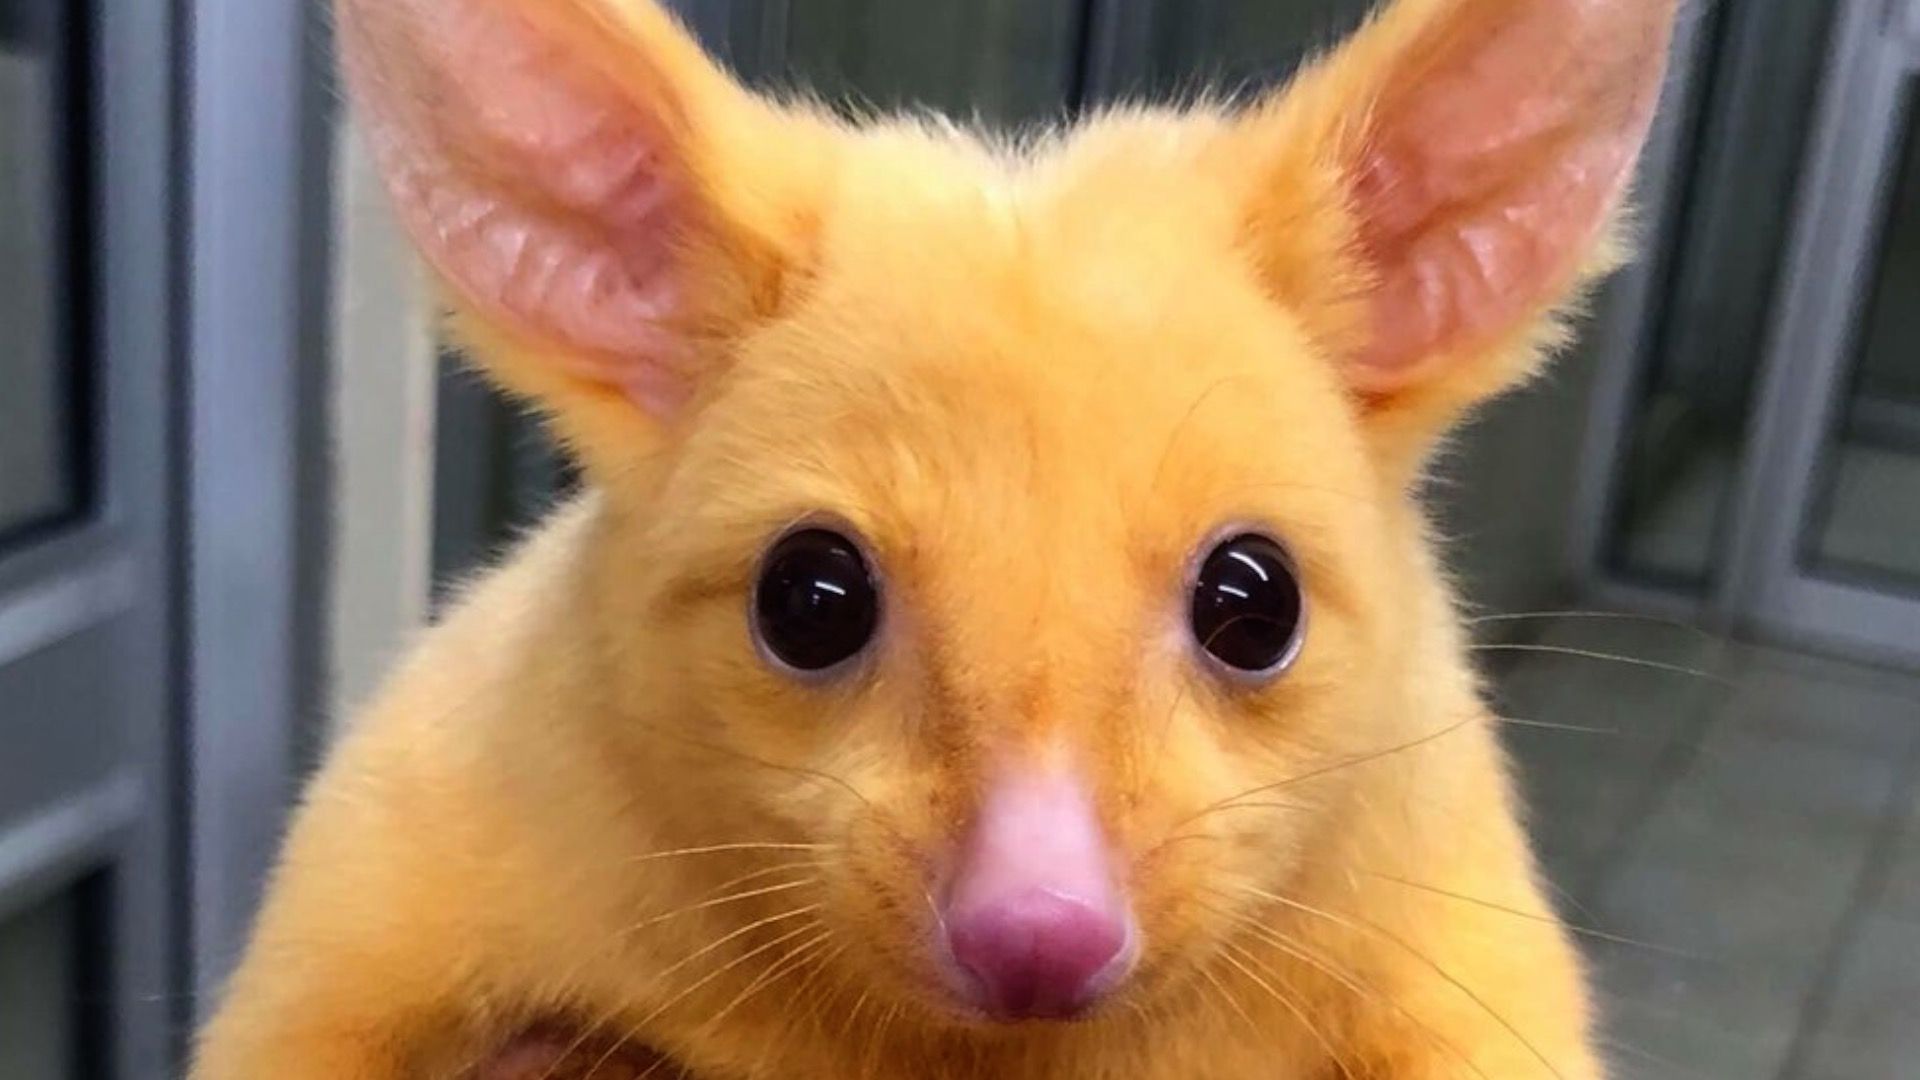 Pikachu is that you? Rare golden possum given Pokemon-themed name